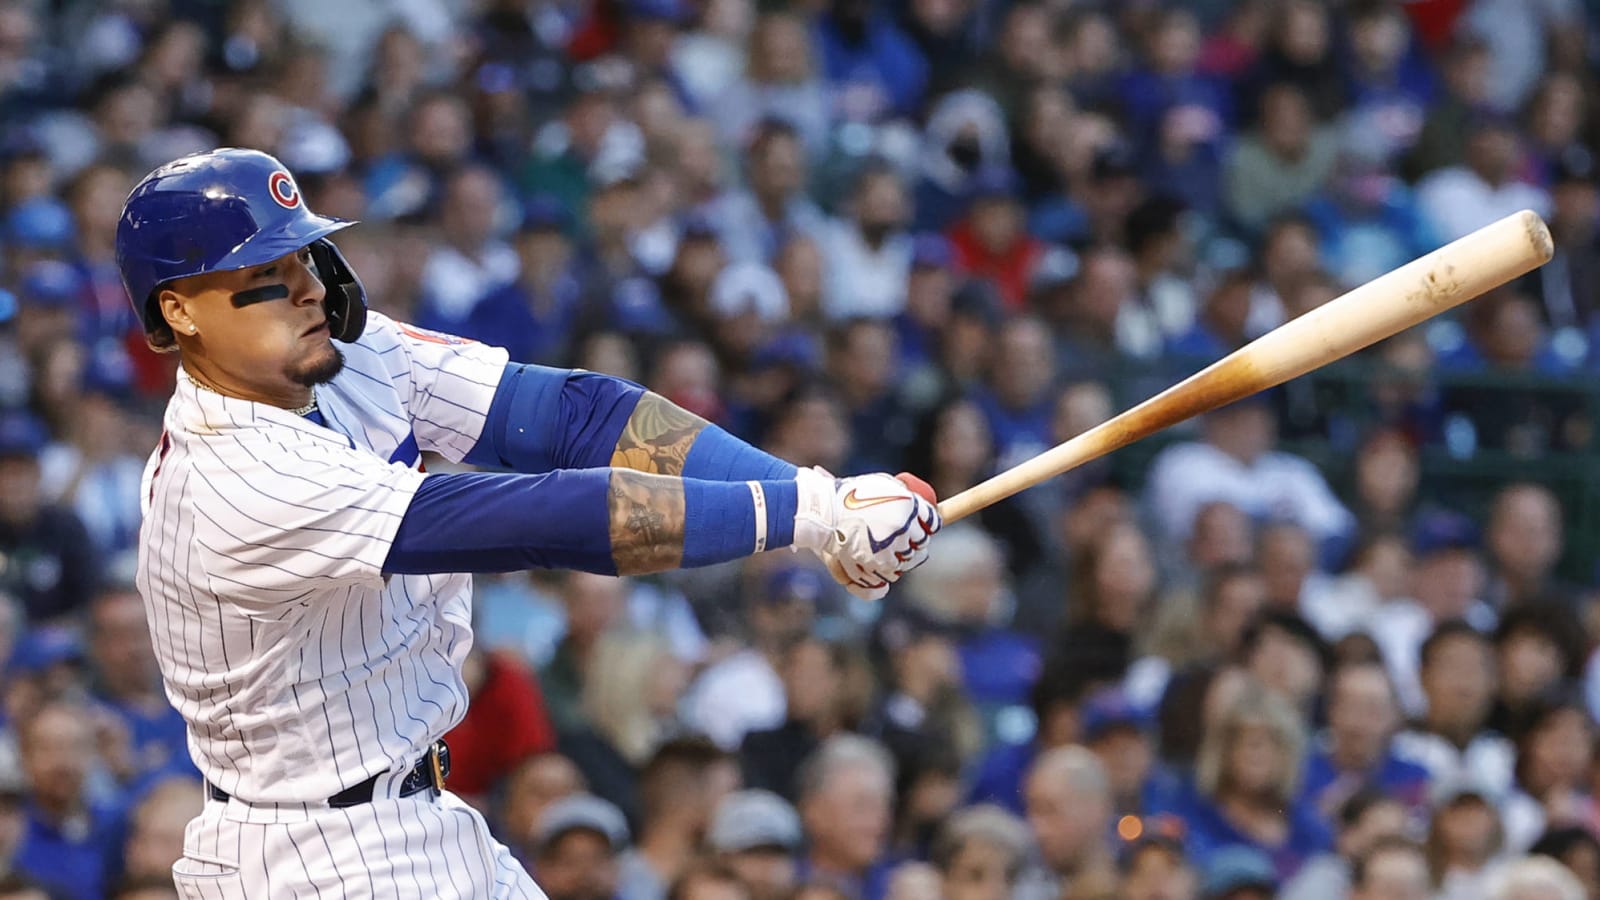 Cubs manager David Ross explains why he benched Javy Baez